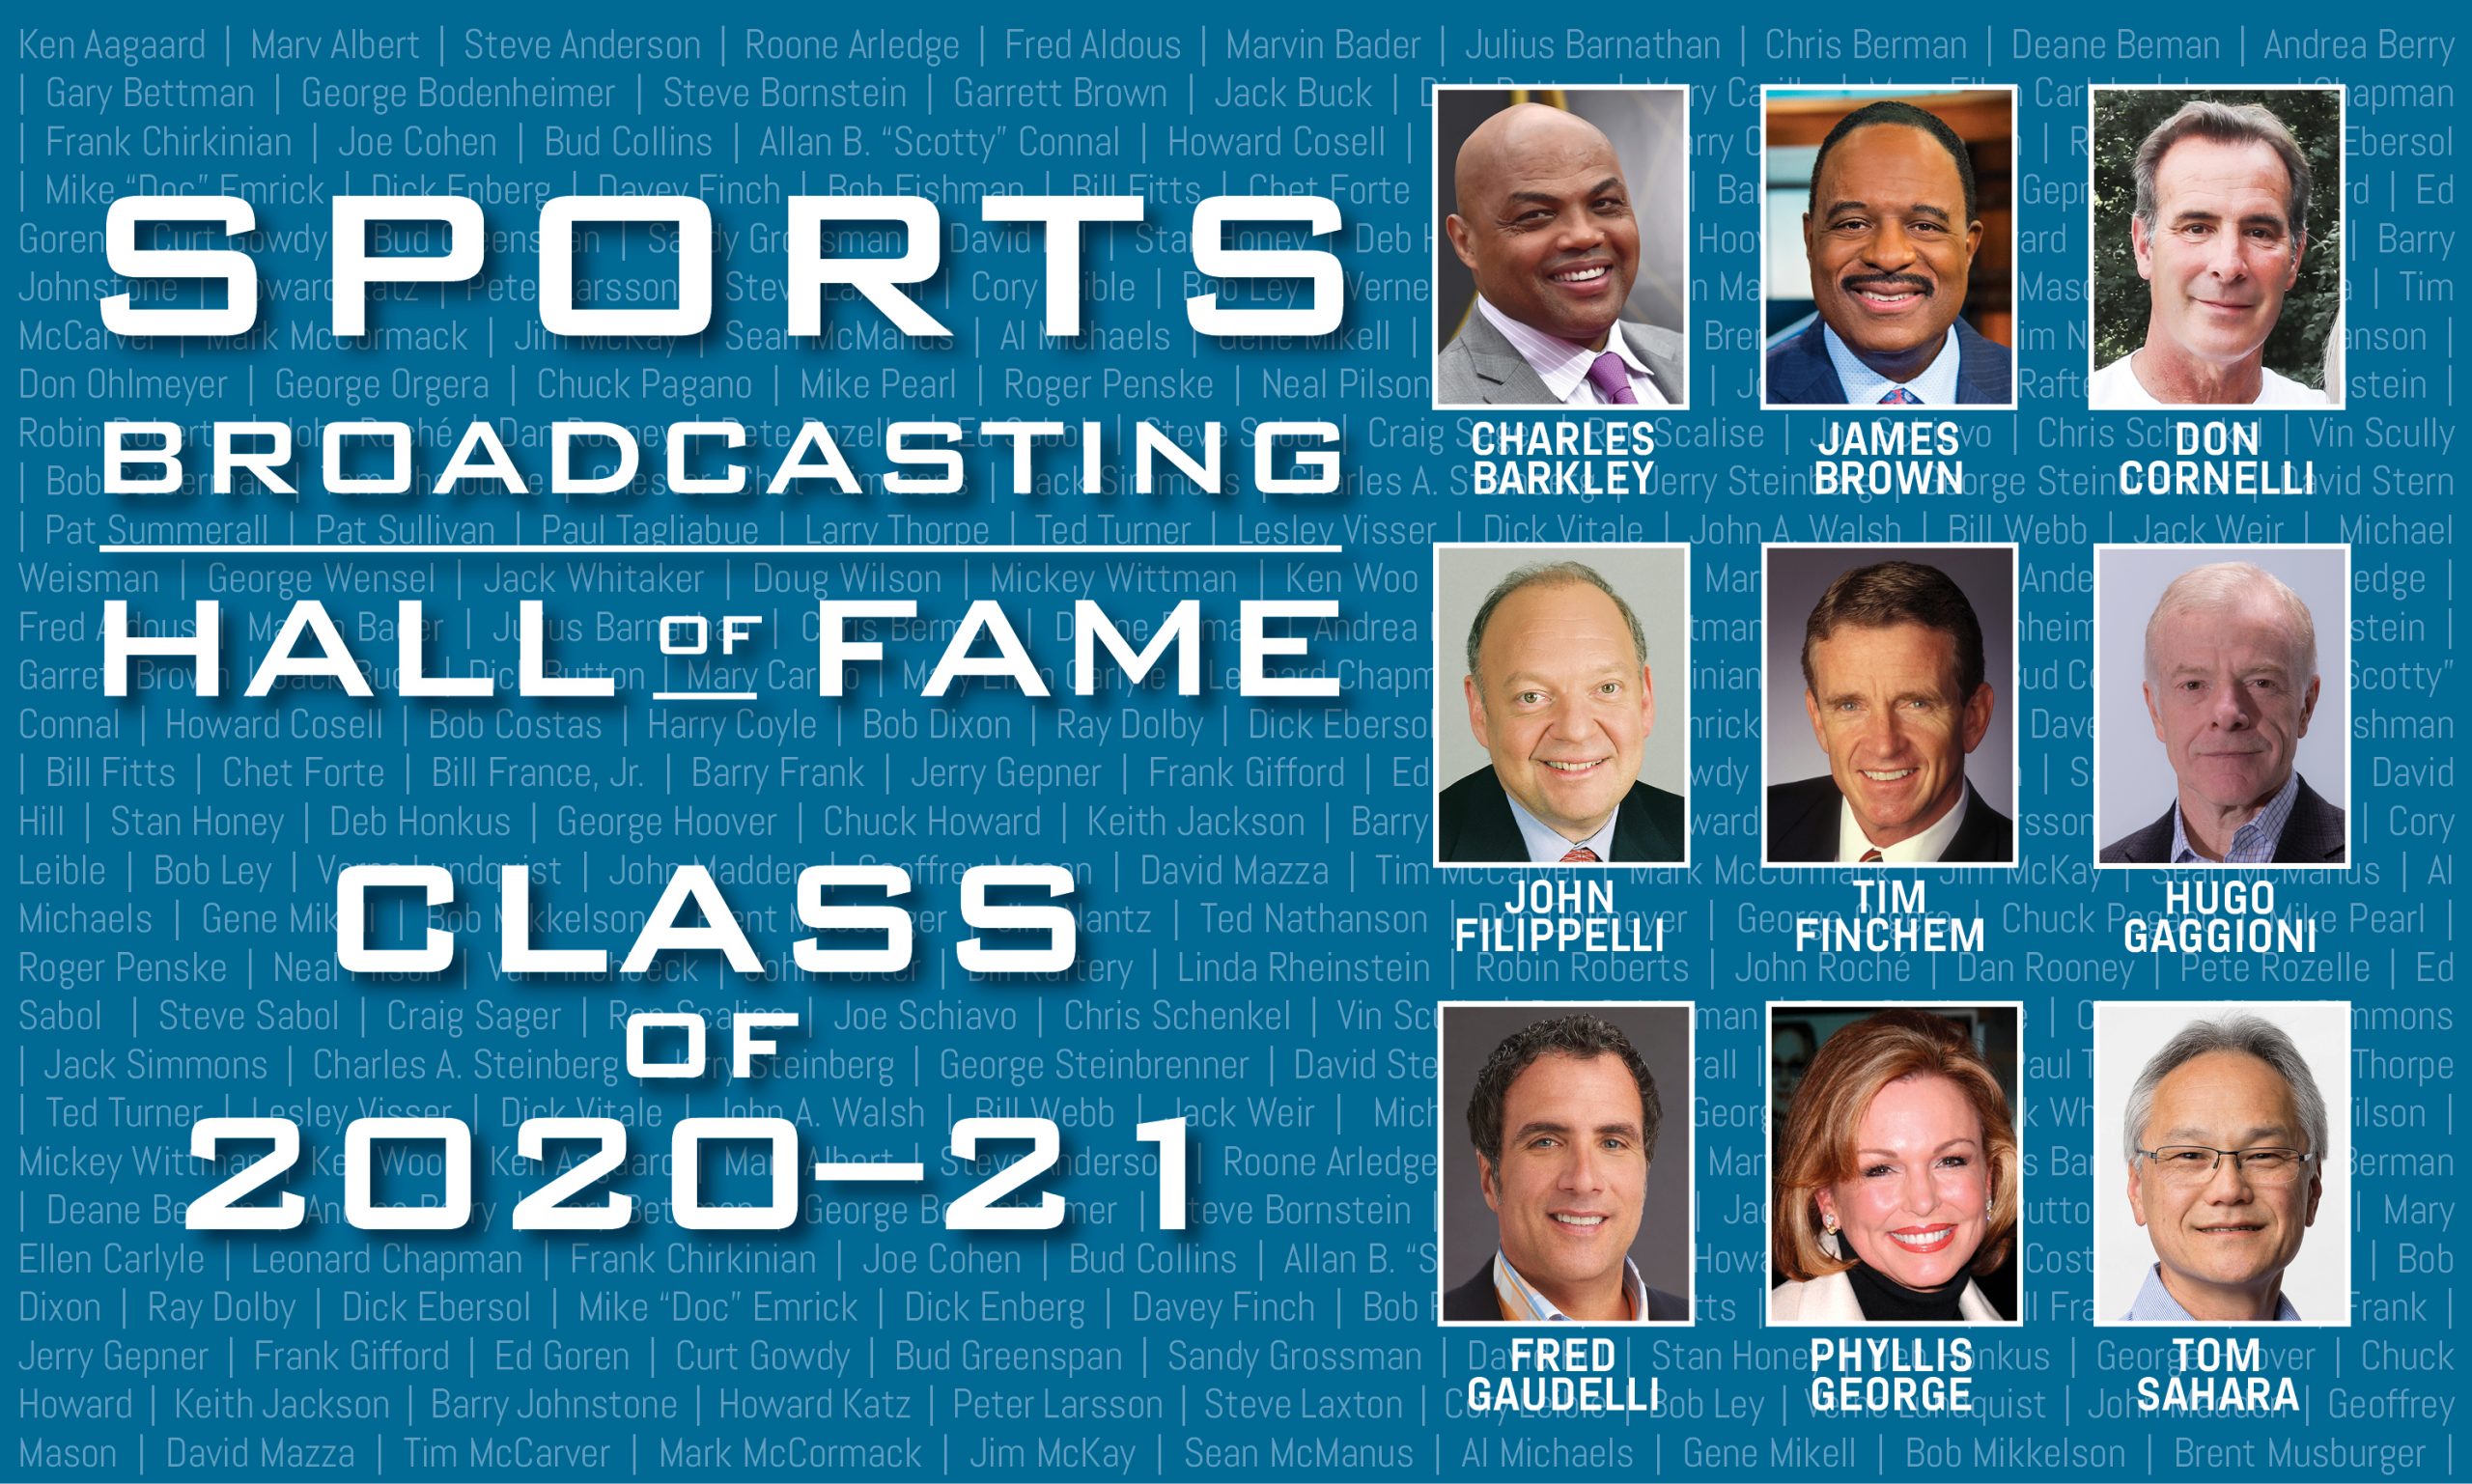 Sports Broadcasting Hall of Fame Ceremony Returns to NYC to Induct Nine